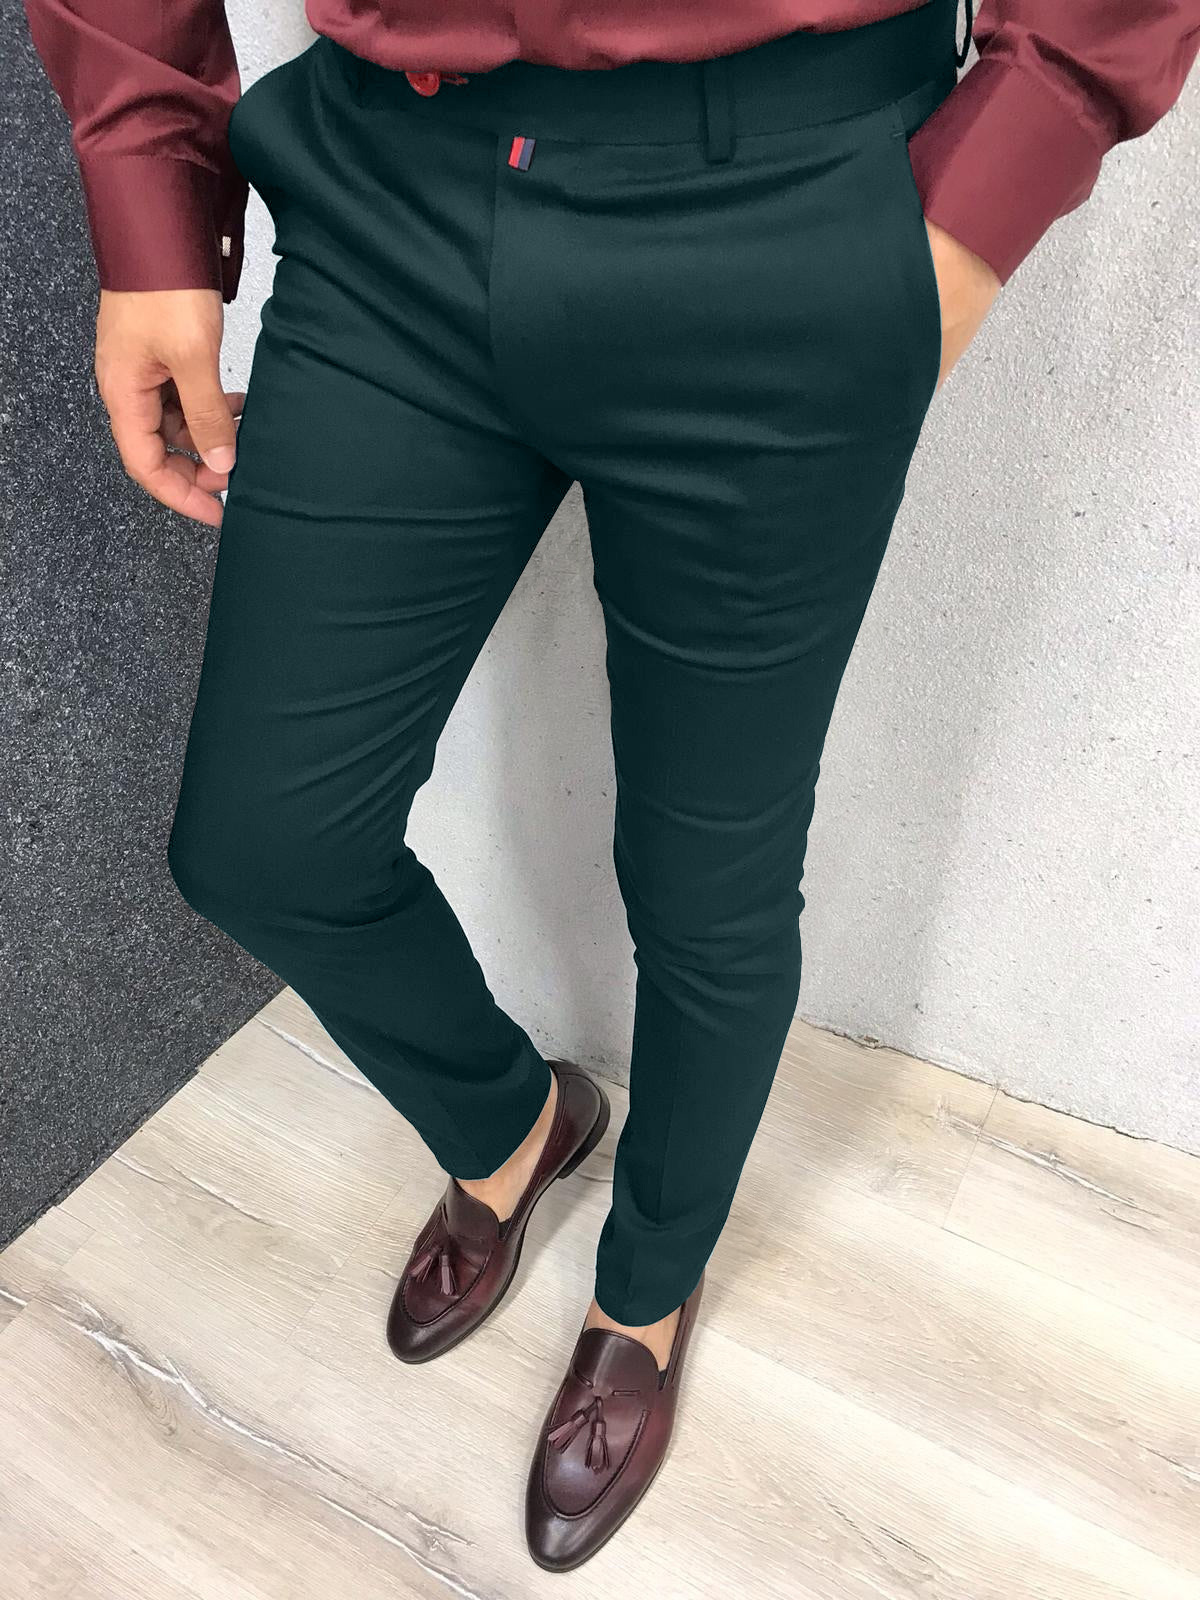 men's formal tappered pants in solid color for casual wear 6814